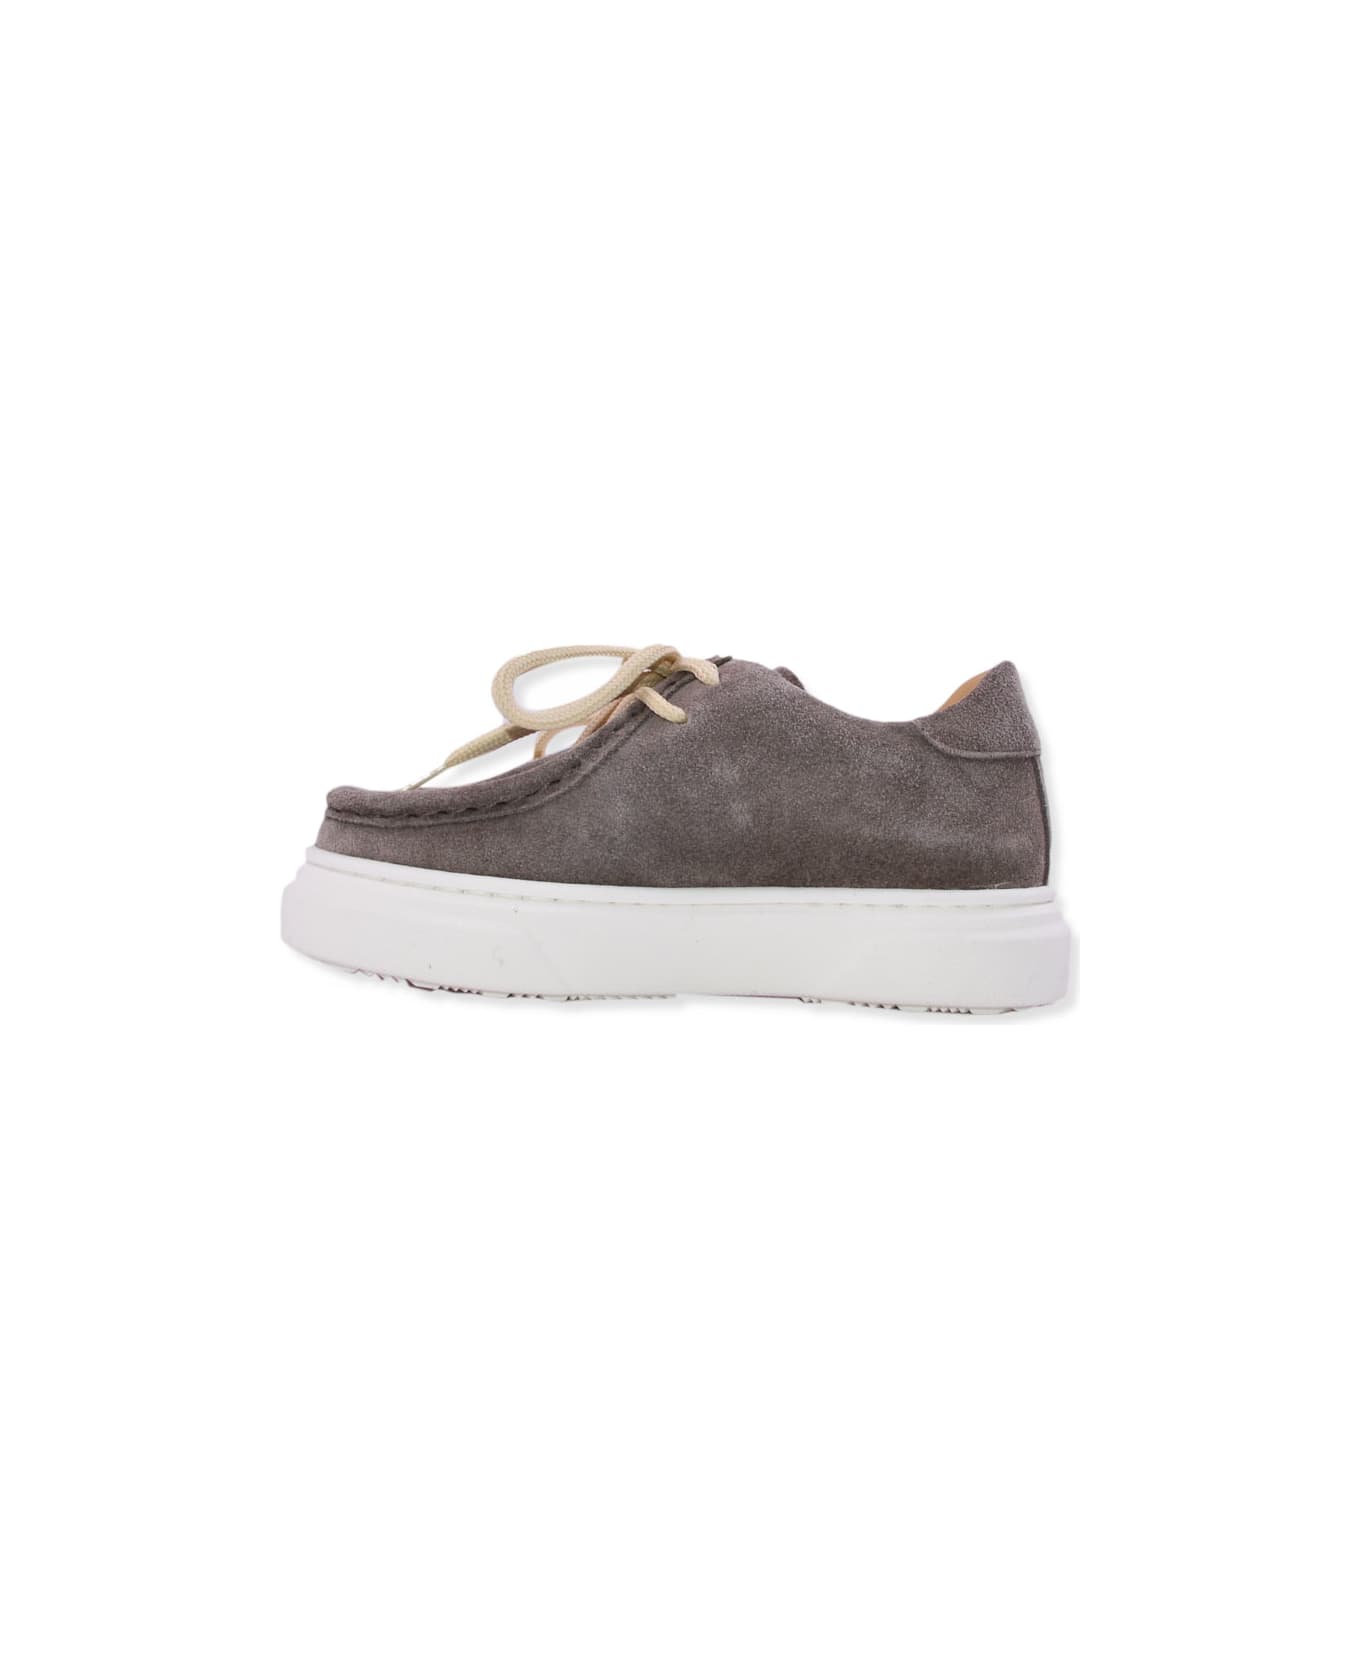 Andrea Montelpare Sneakers In Suede Leather - Beige